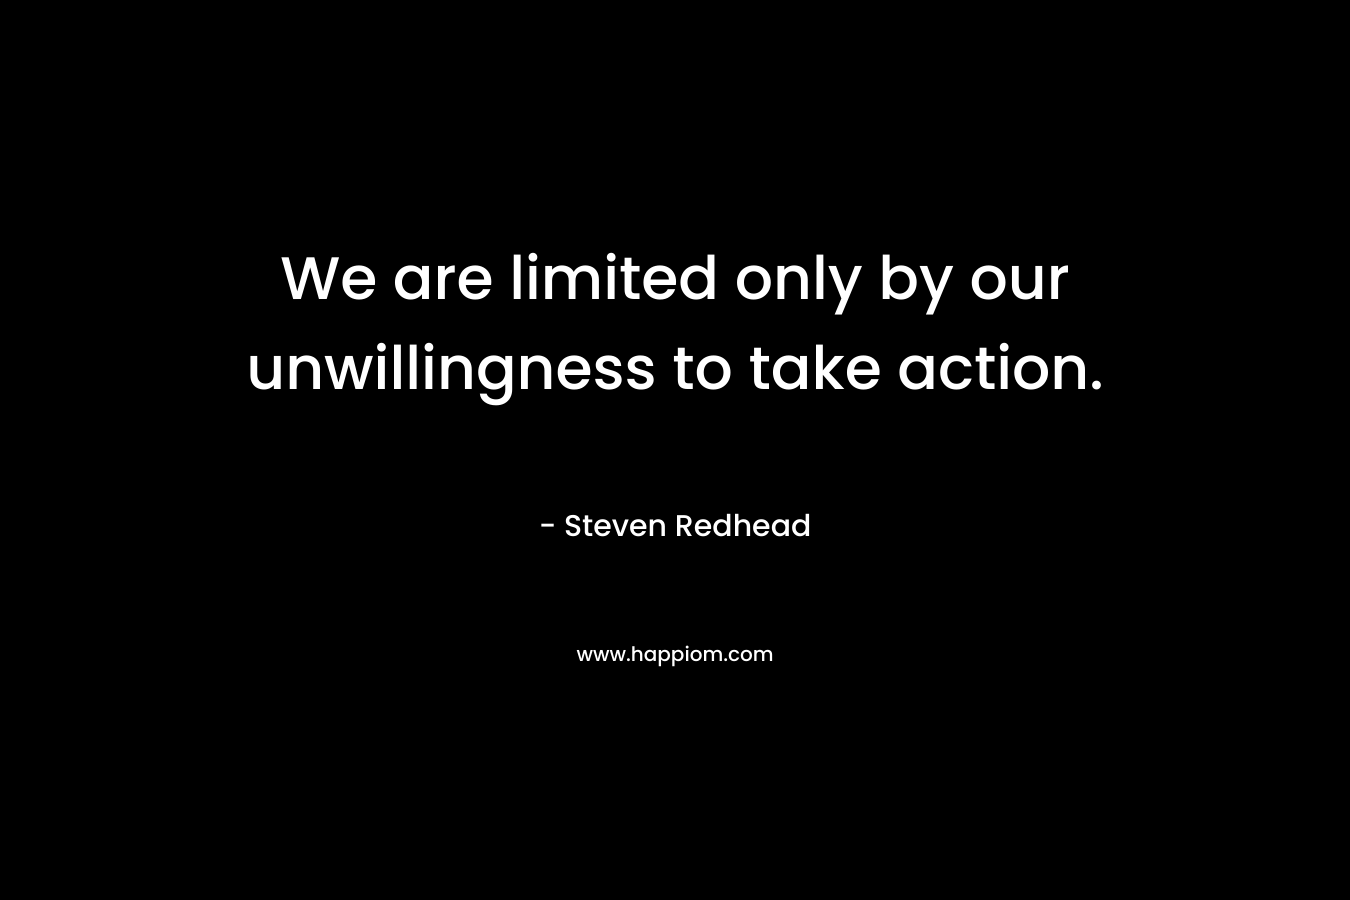 We are limited only by our unwillingness to take action.